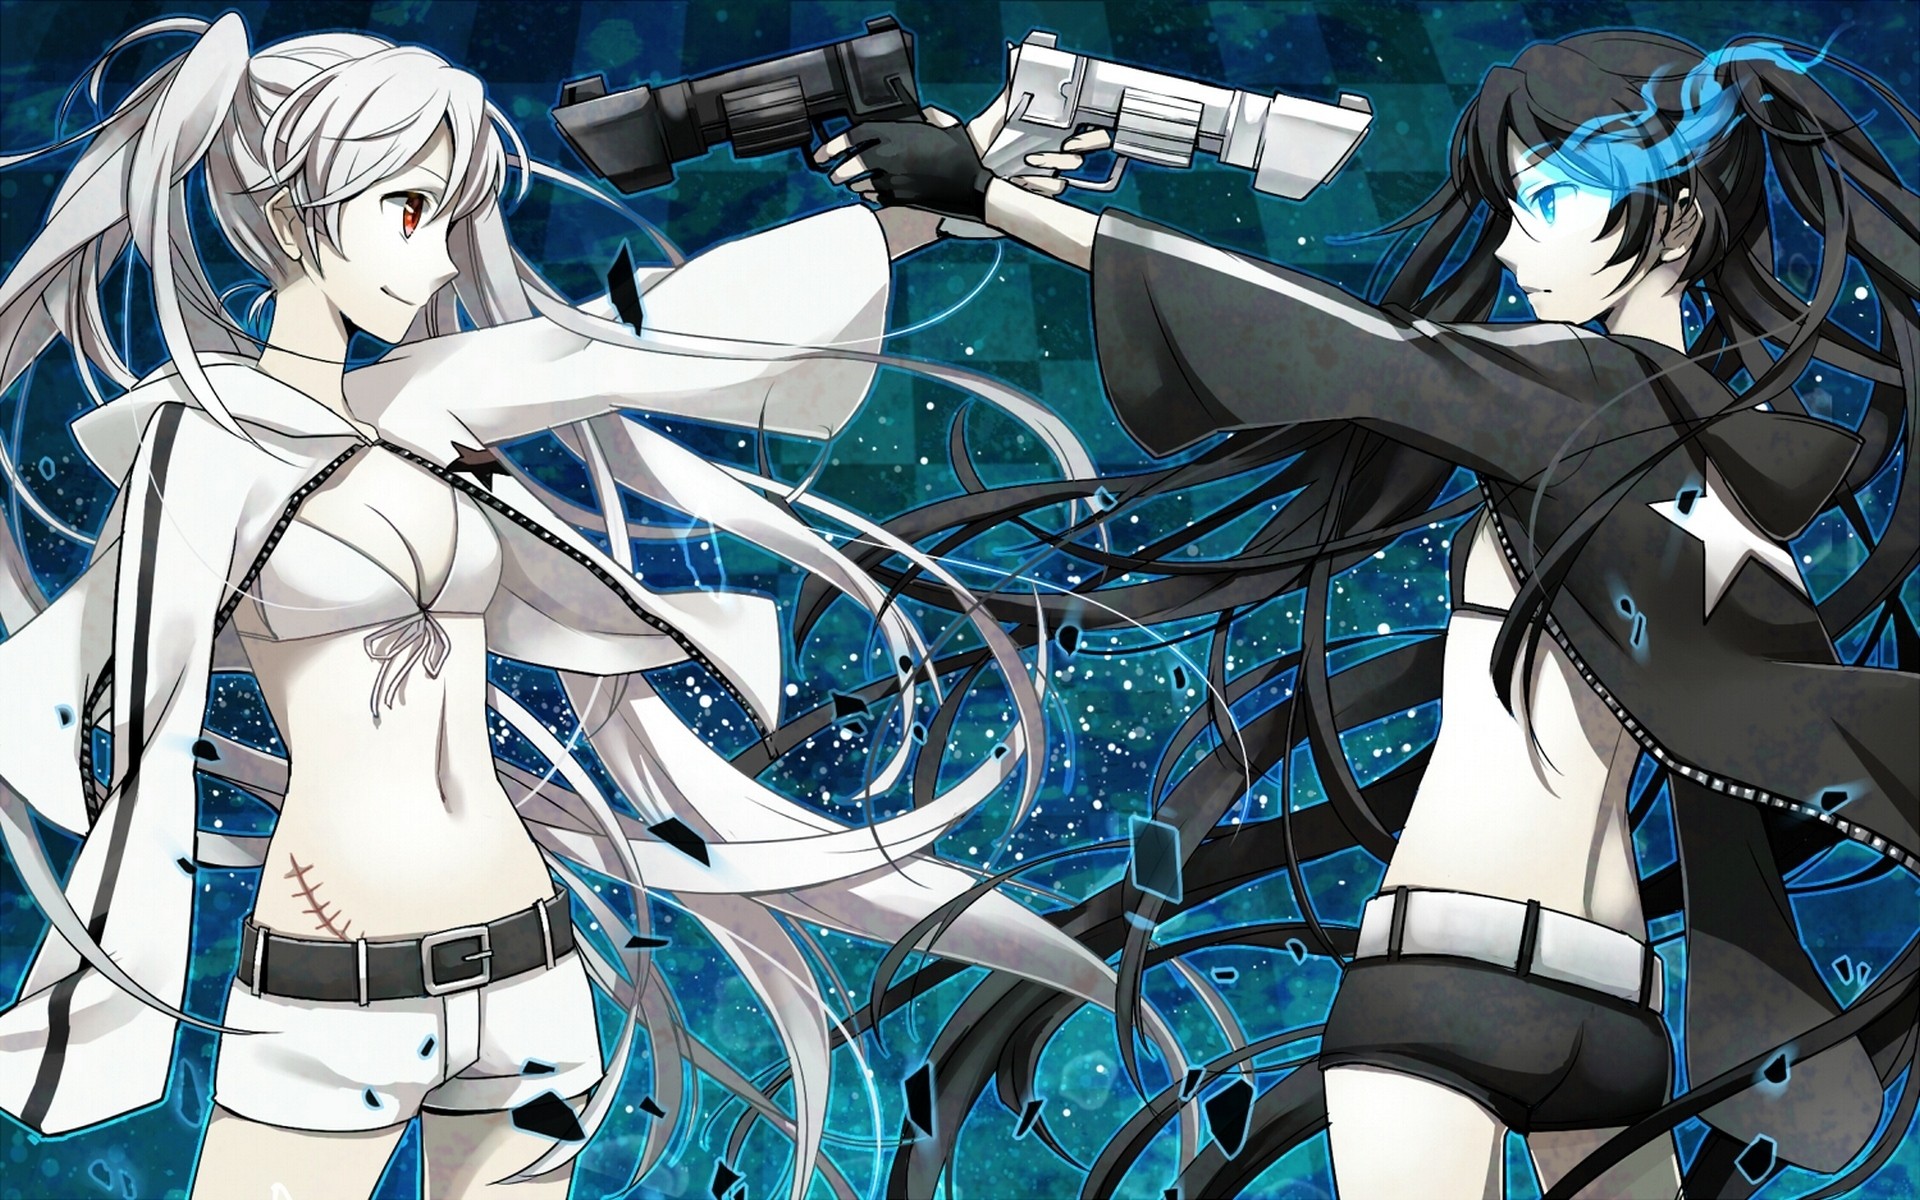 Anime 1920x1200 Black Rock Shooter anime girls anime White Rock Shooter gun women two women girls with guns belly red eyes blue eyes weapon anime girls with guns